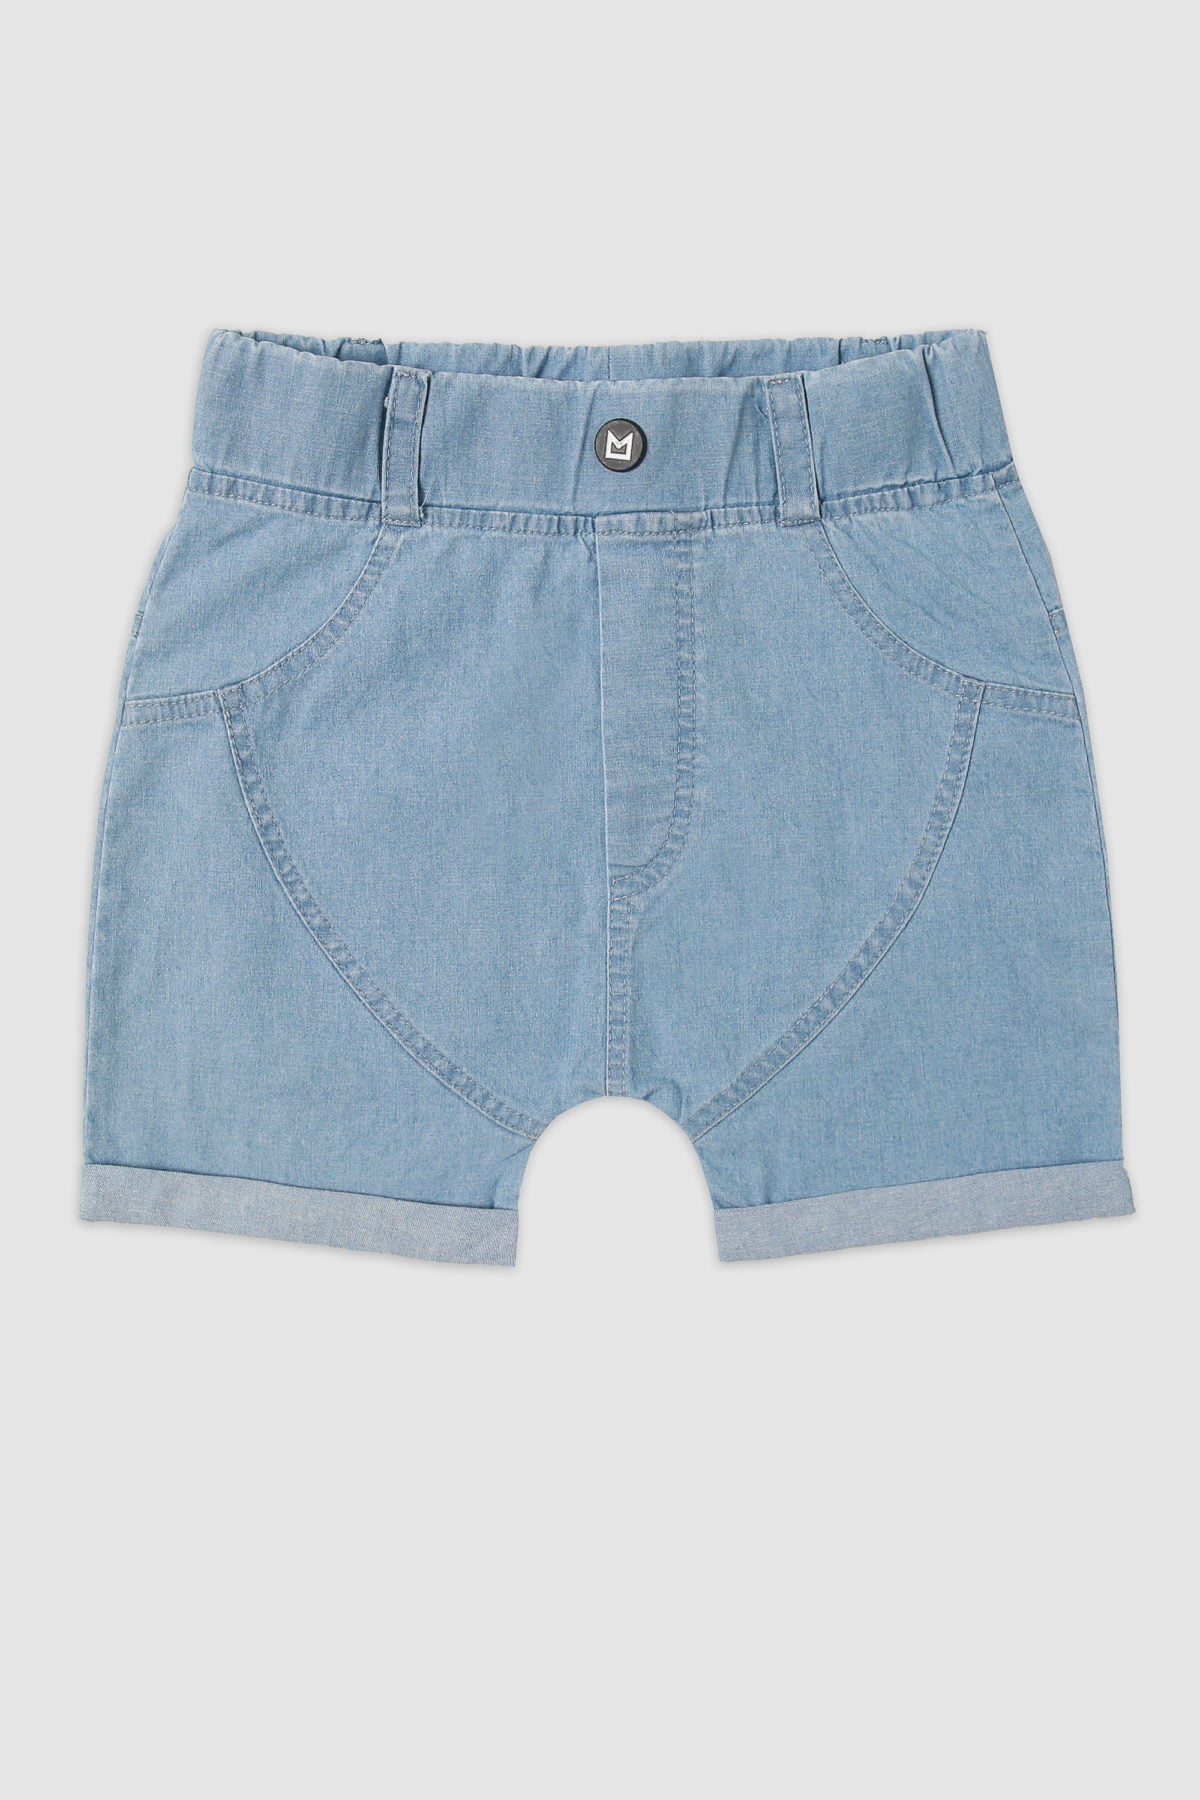 lagoon blue jeans shorts scaled